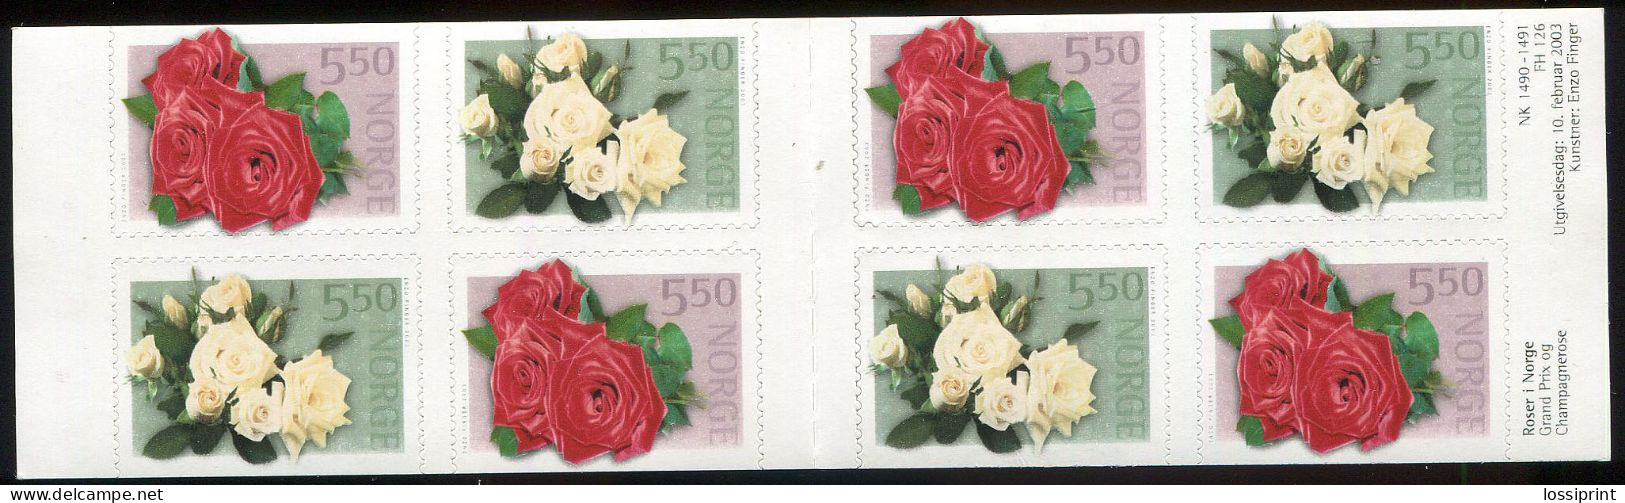 Norway:Unused Stamps Booklet Flowers, 2003, MNH - Roses